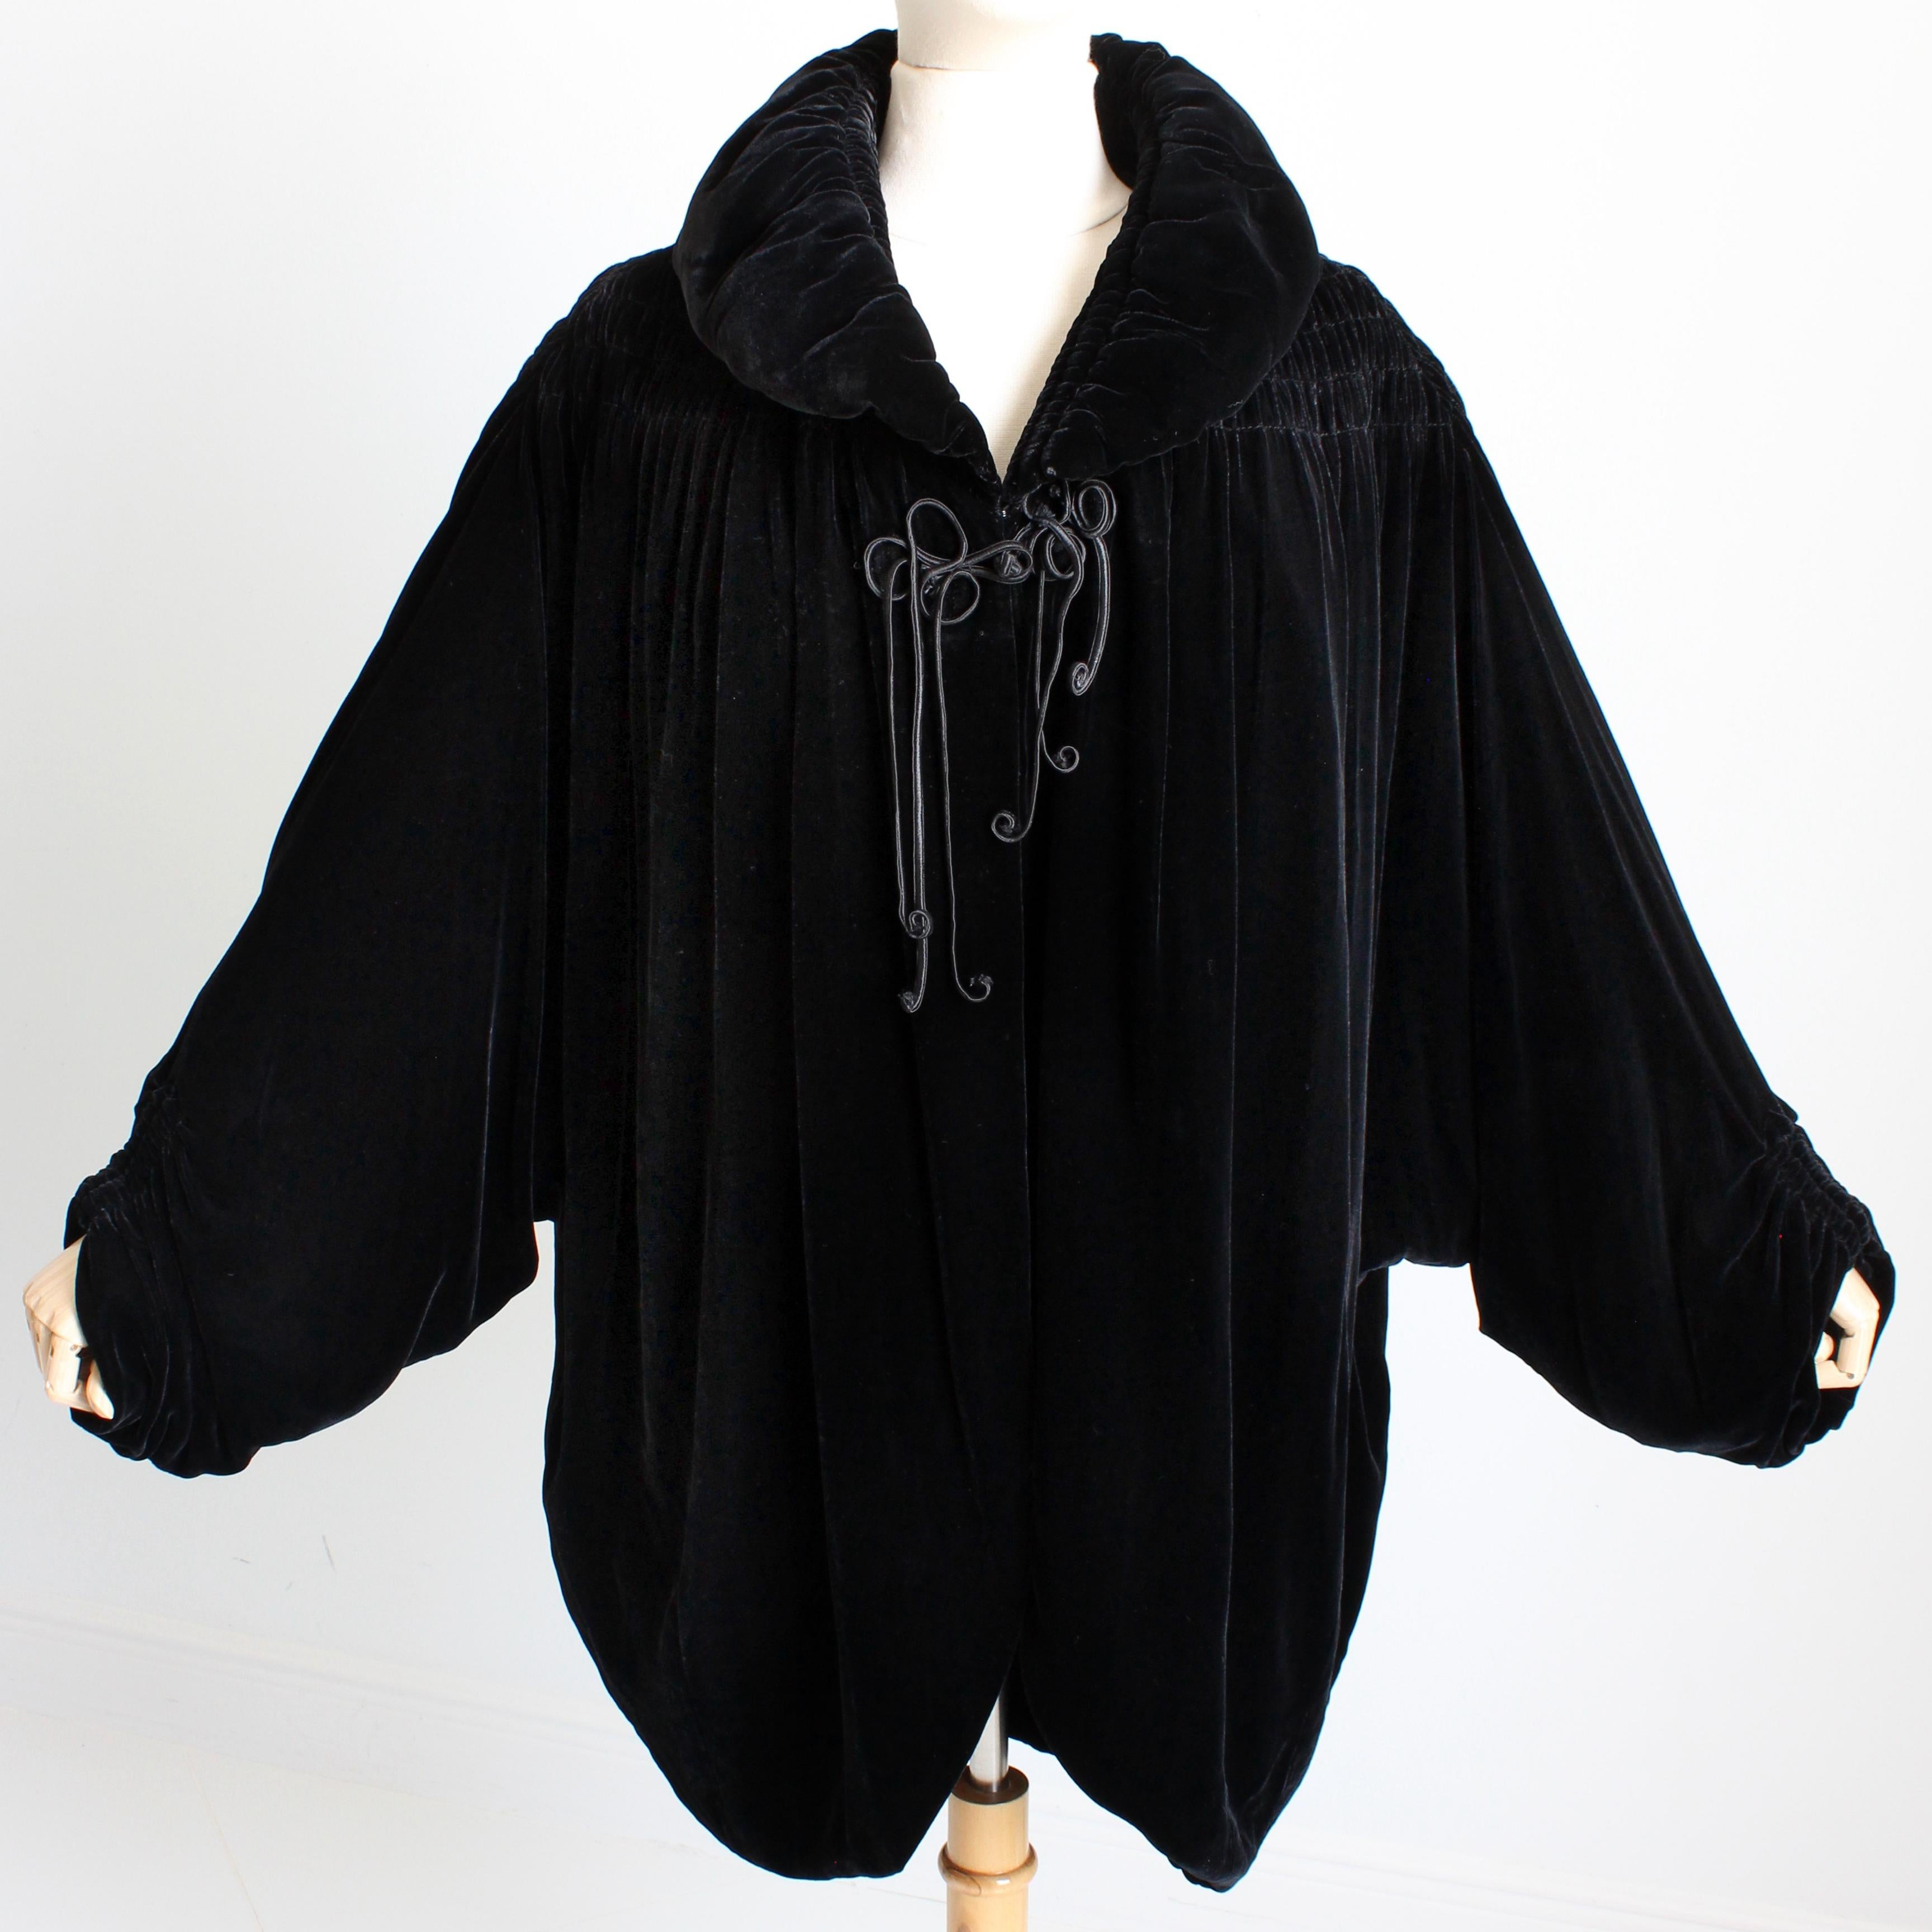 Norma Kamali OMO Jacket Black Silk Velvet Cocoon Batwing Sleeves Shirring 90s  In Good Condition For Sale In Port Saint Lucie, FL